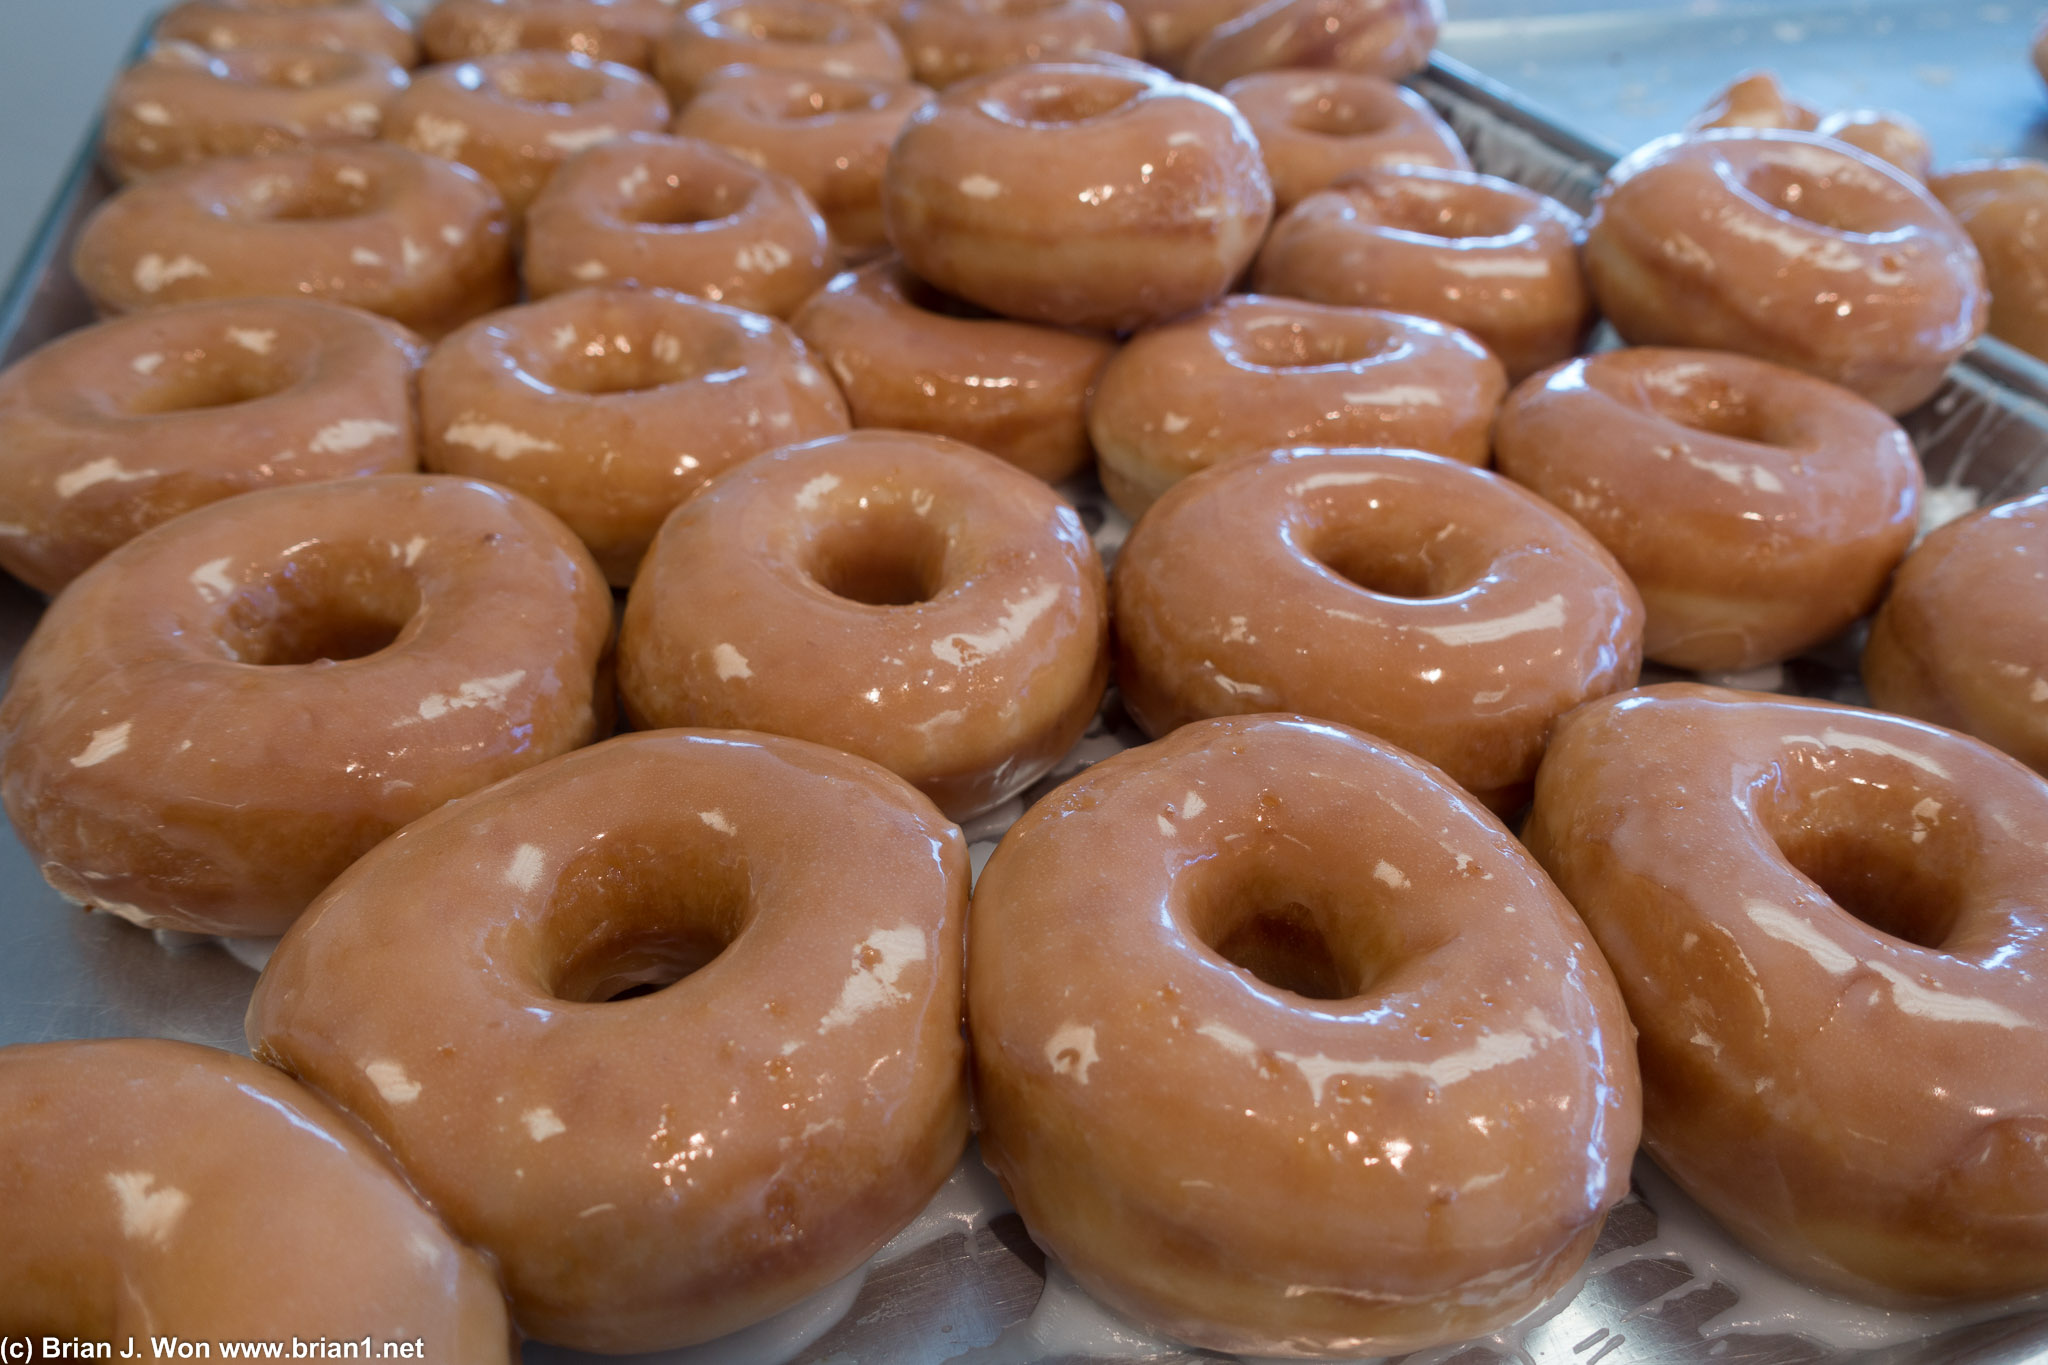 Fresh donuts at Primo's!